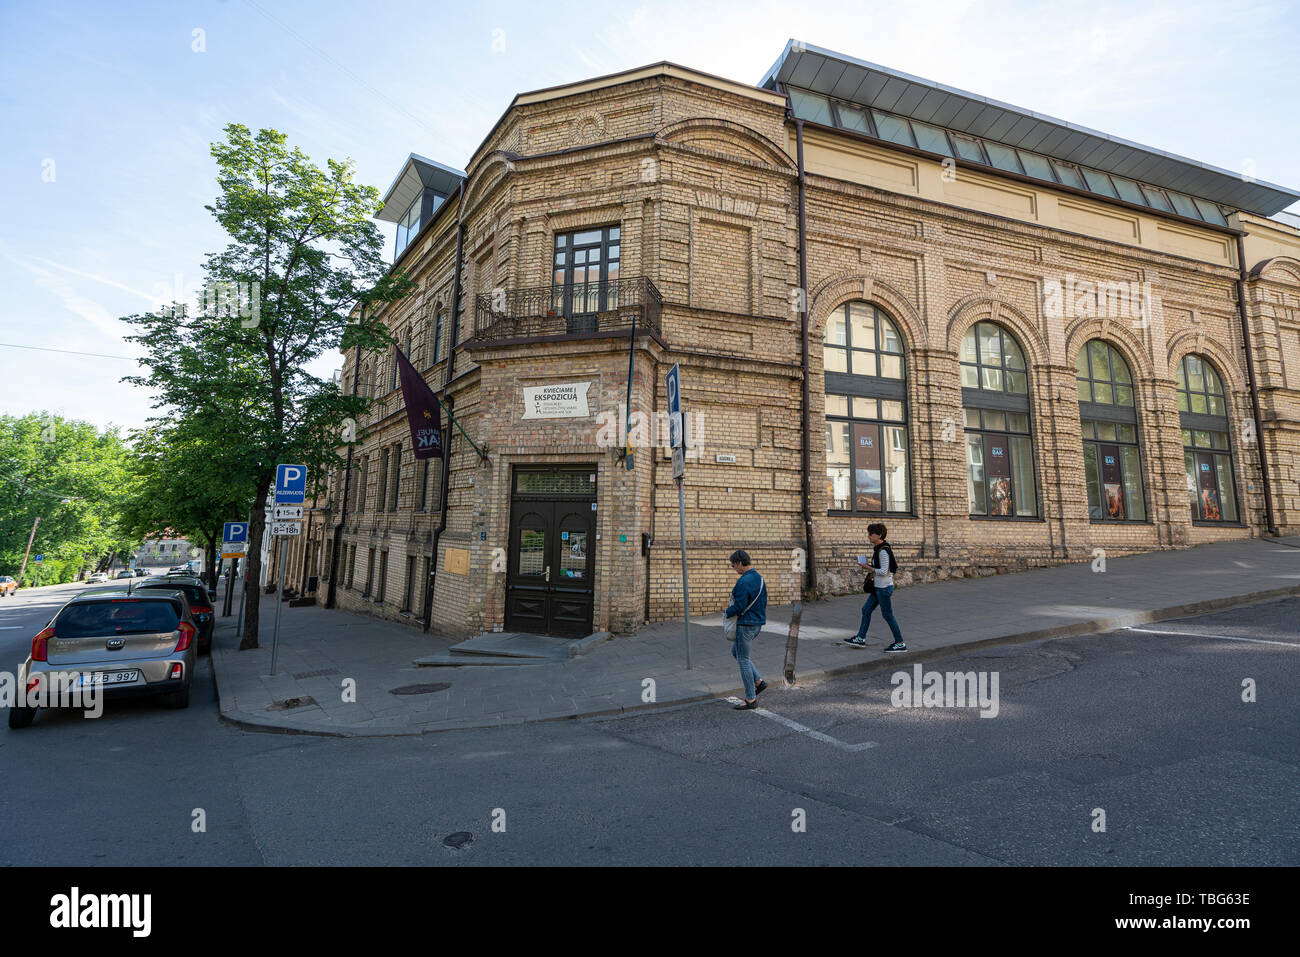 Vilnius, Lithuania. May 2019.   A view of Vilna Gaon State Jewish Museum building Stock Photo